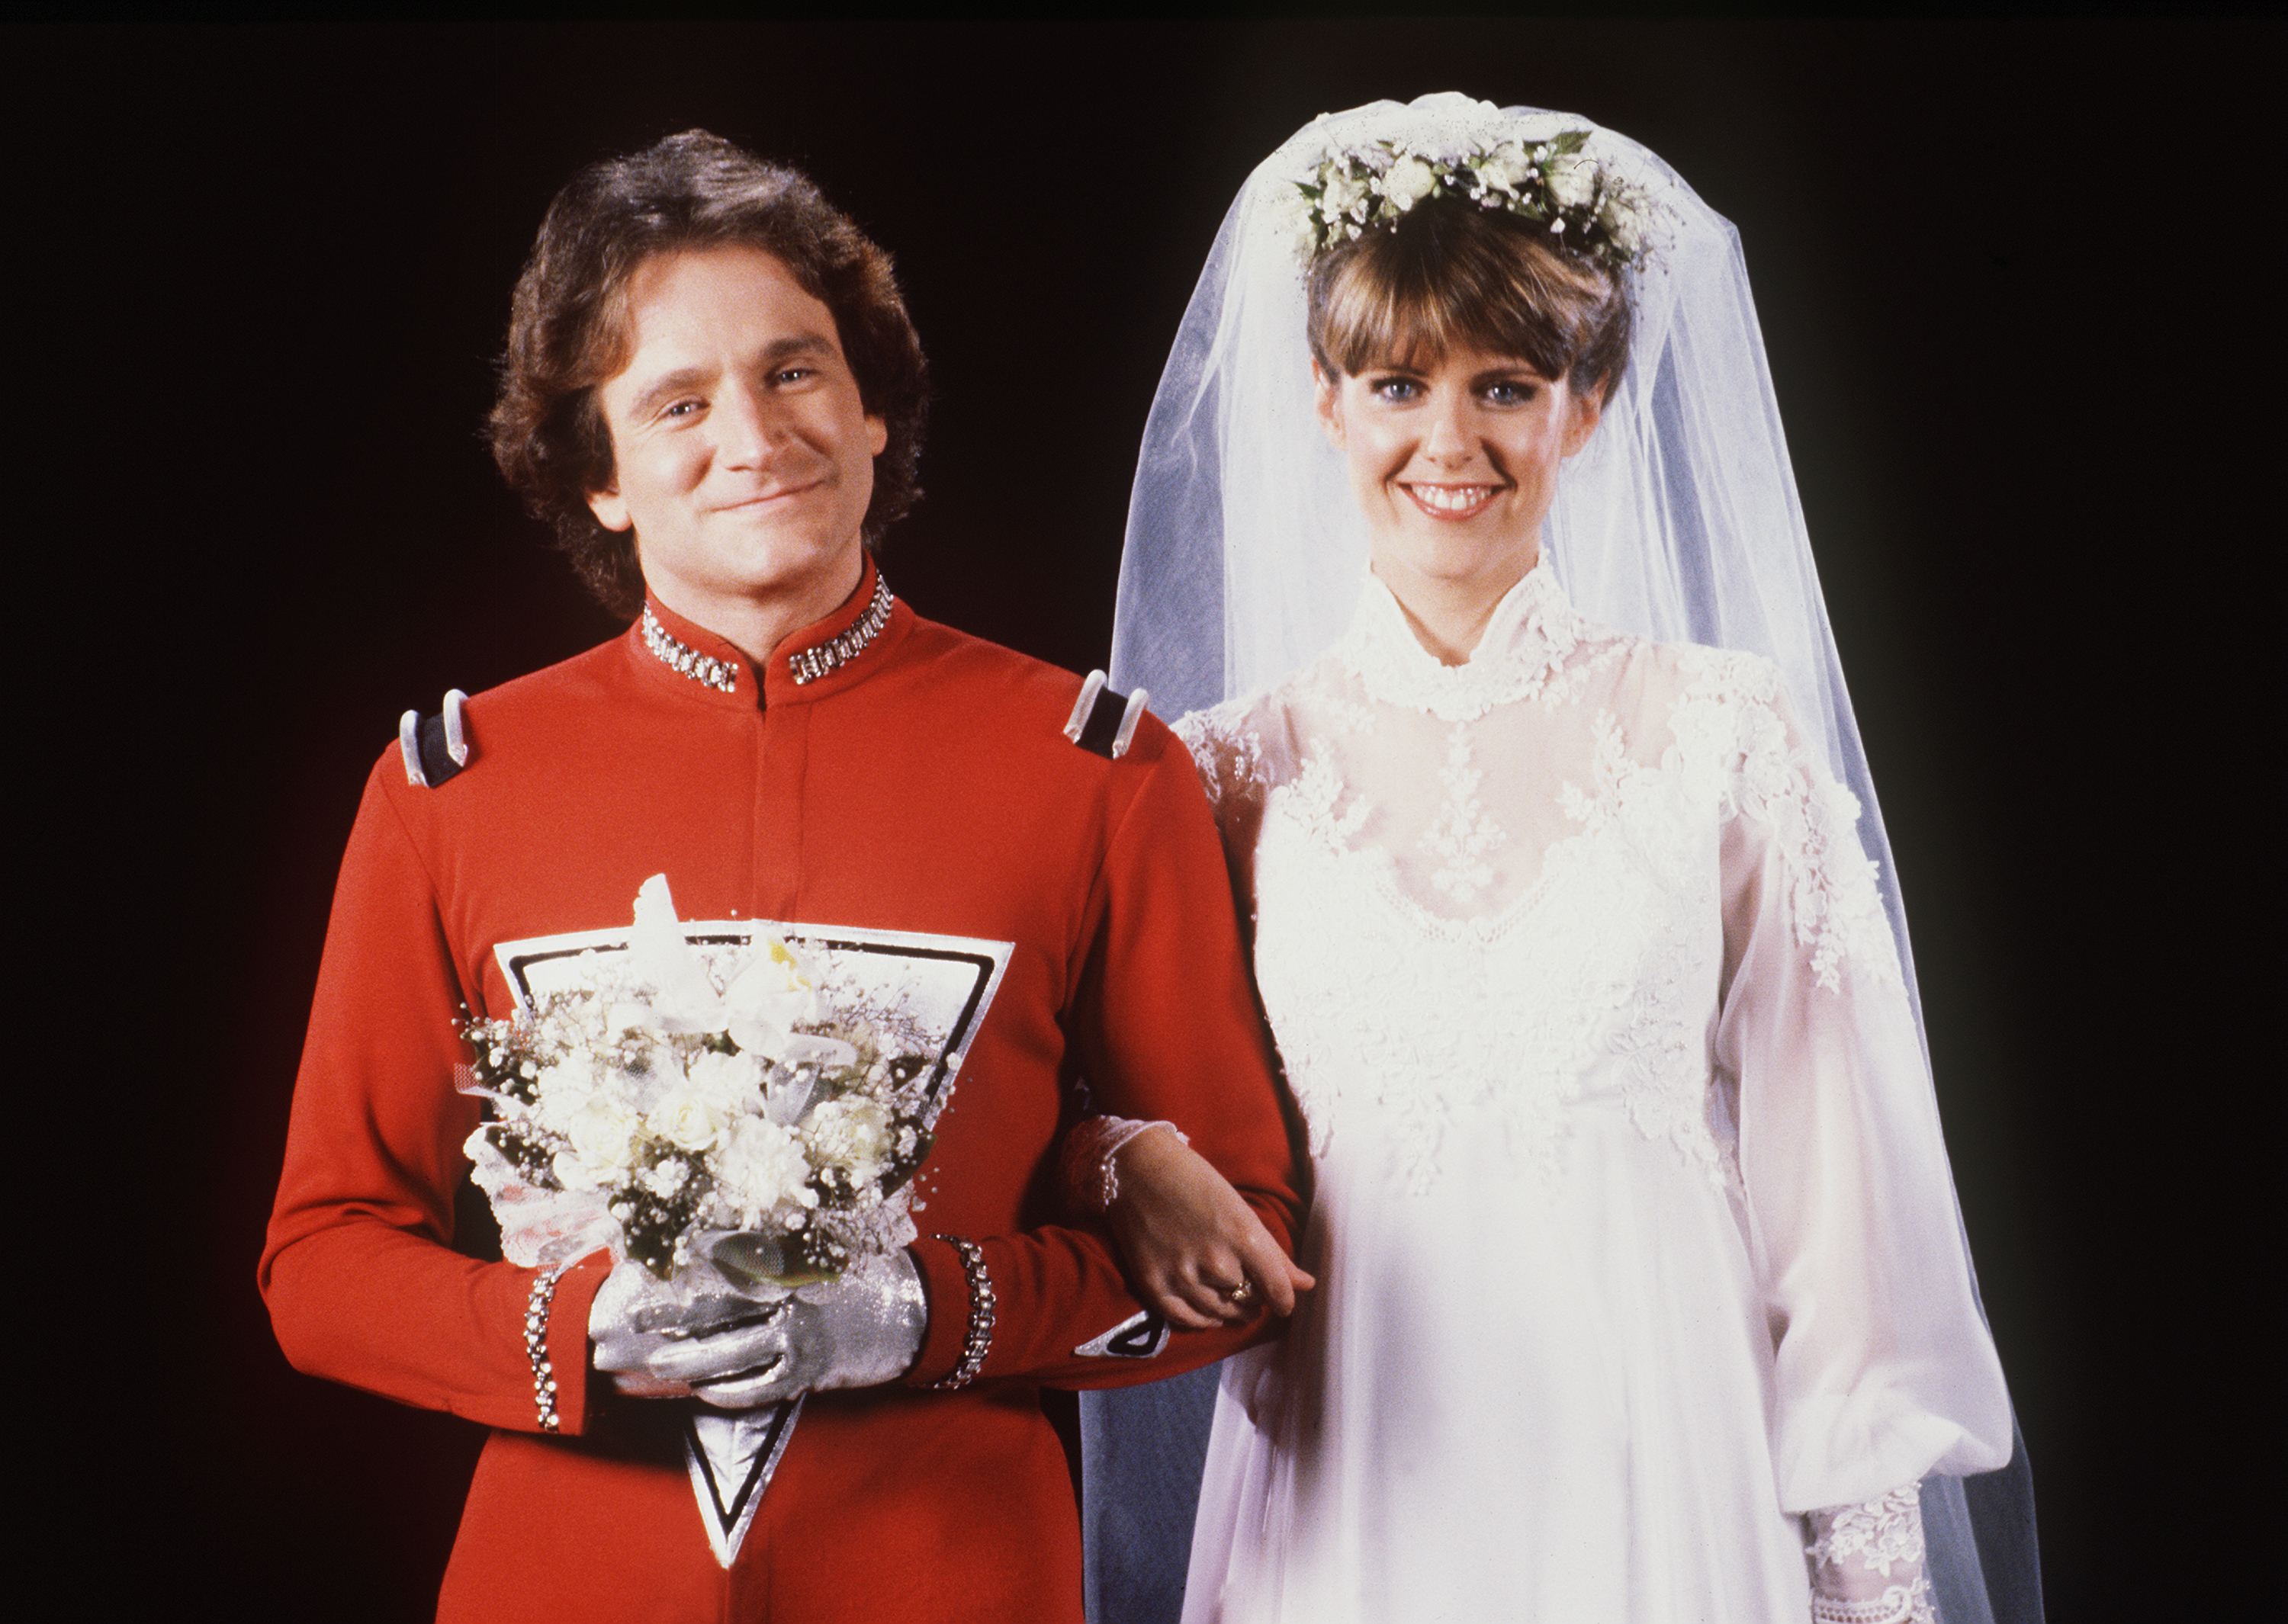 Robin Williams as Mork and Pam Dawber as Mindy on "The Wedding" episode of "Mork 7 Mindy" on October 15, 1981 | Source: Getty Images